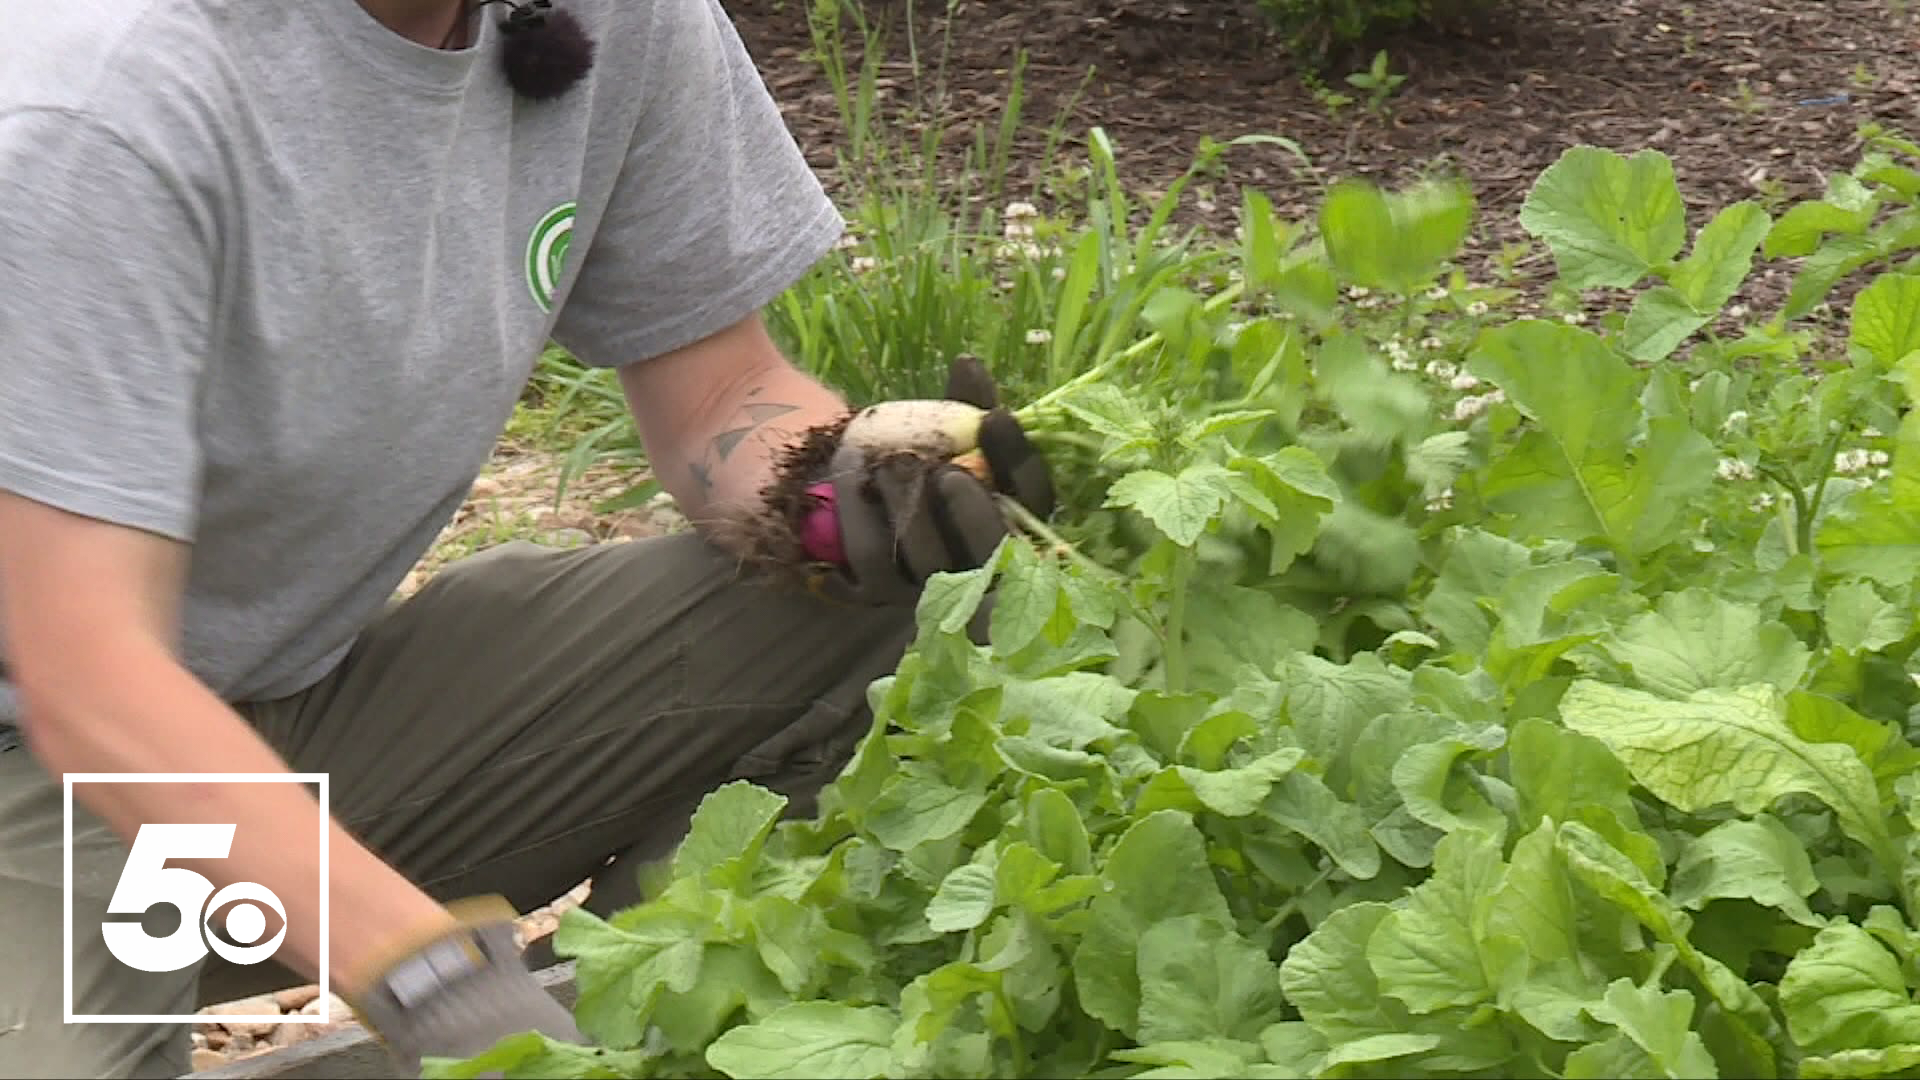 It's time to harvest some vegetables and plant new ones as the summer rolls around at the 5NEWS Garden Club.